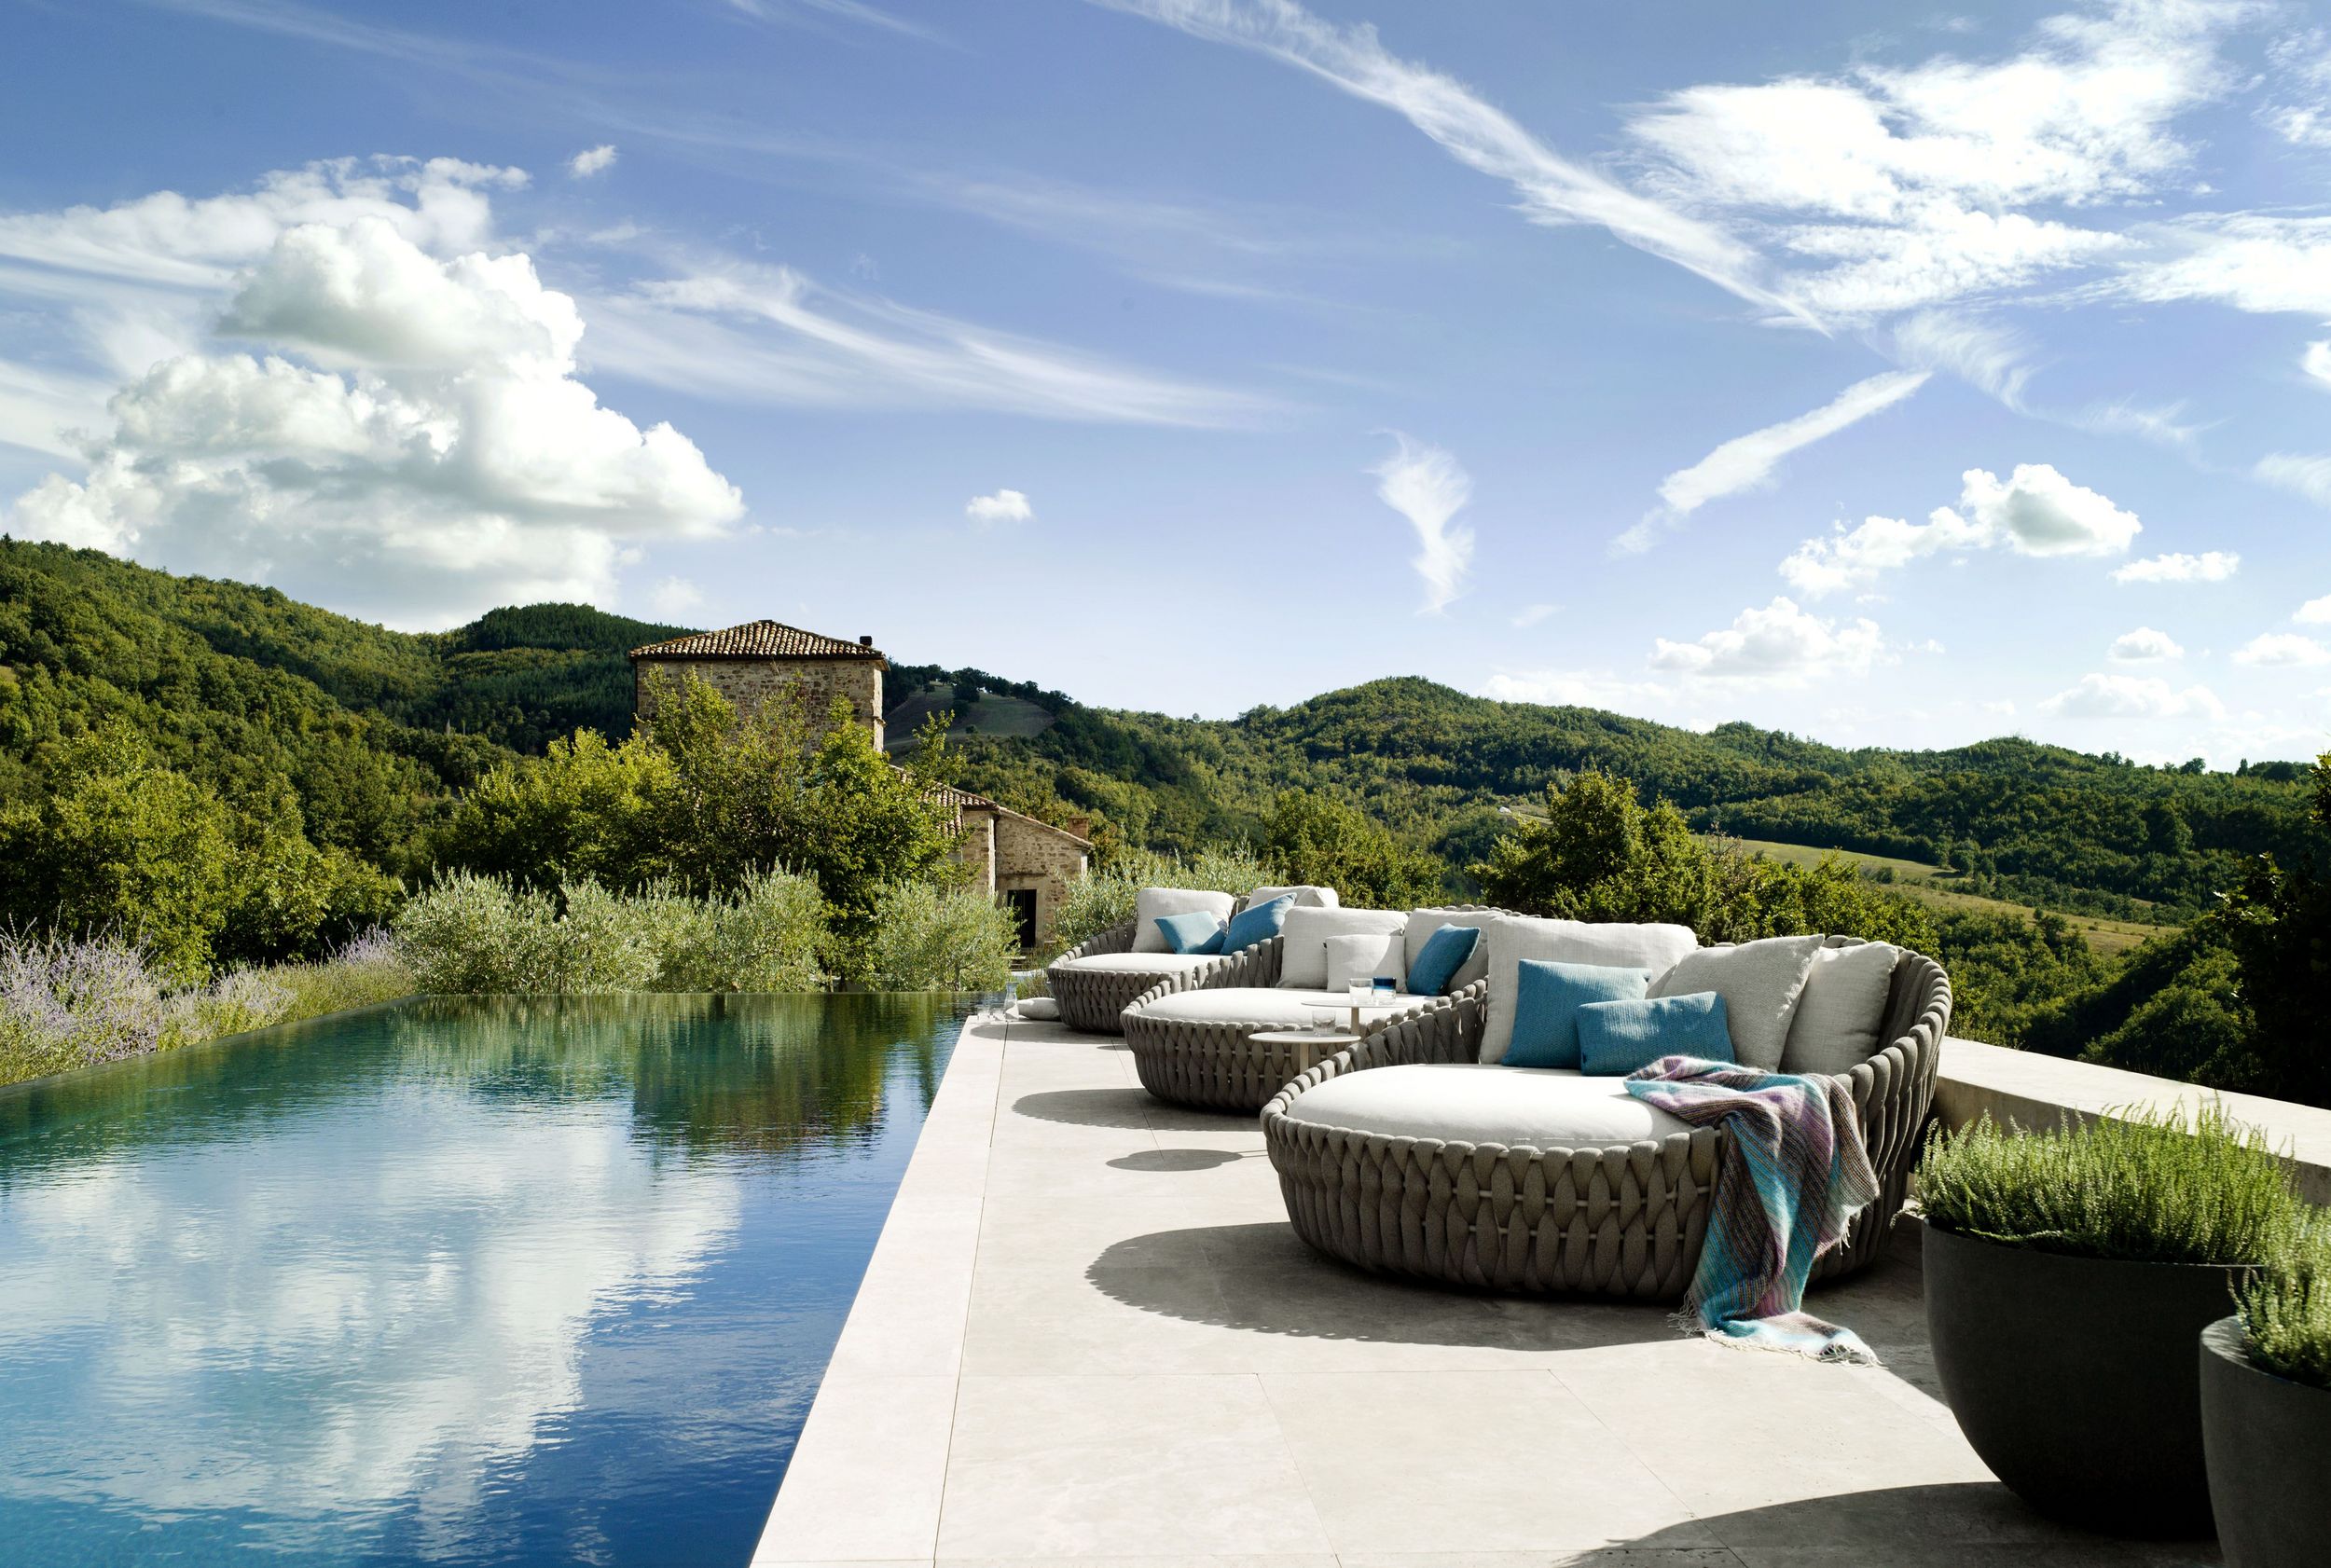 Tosca daybeds by Monica Armani for Tribù